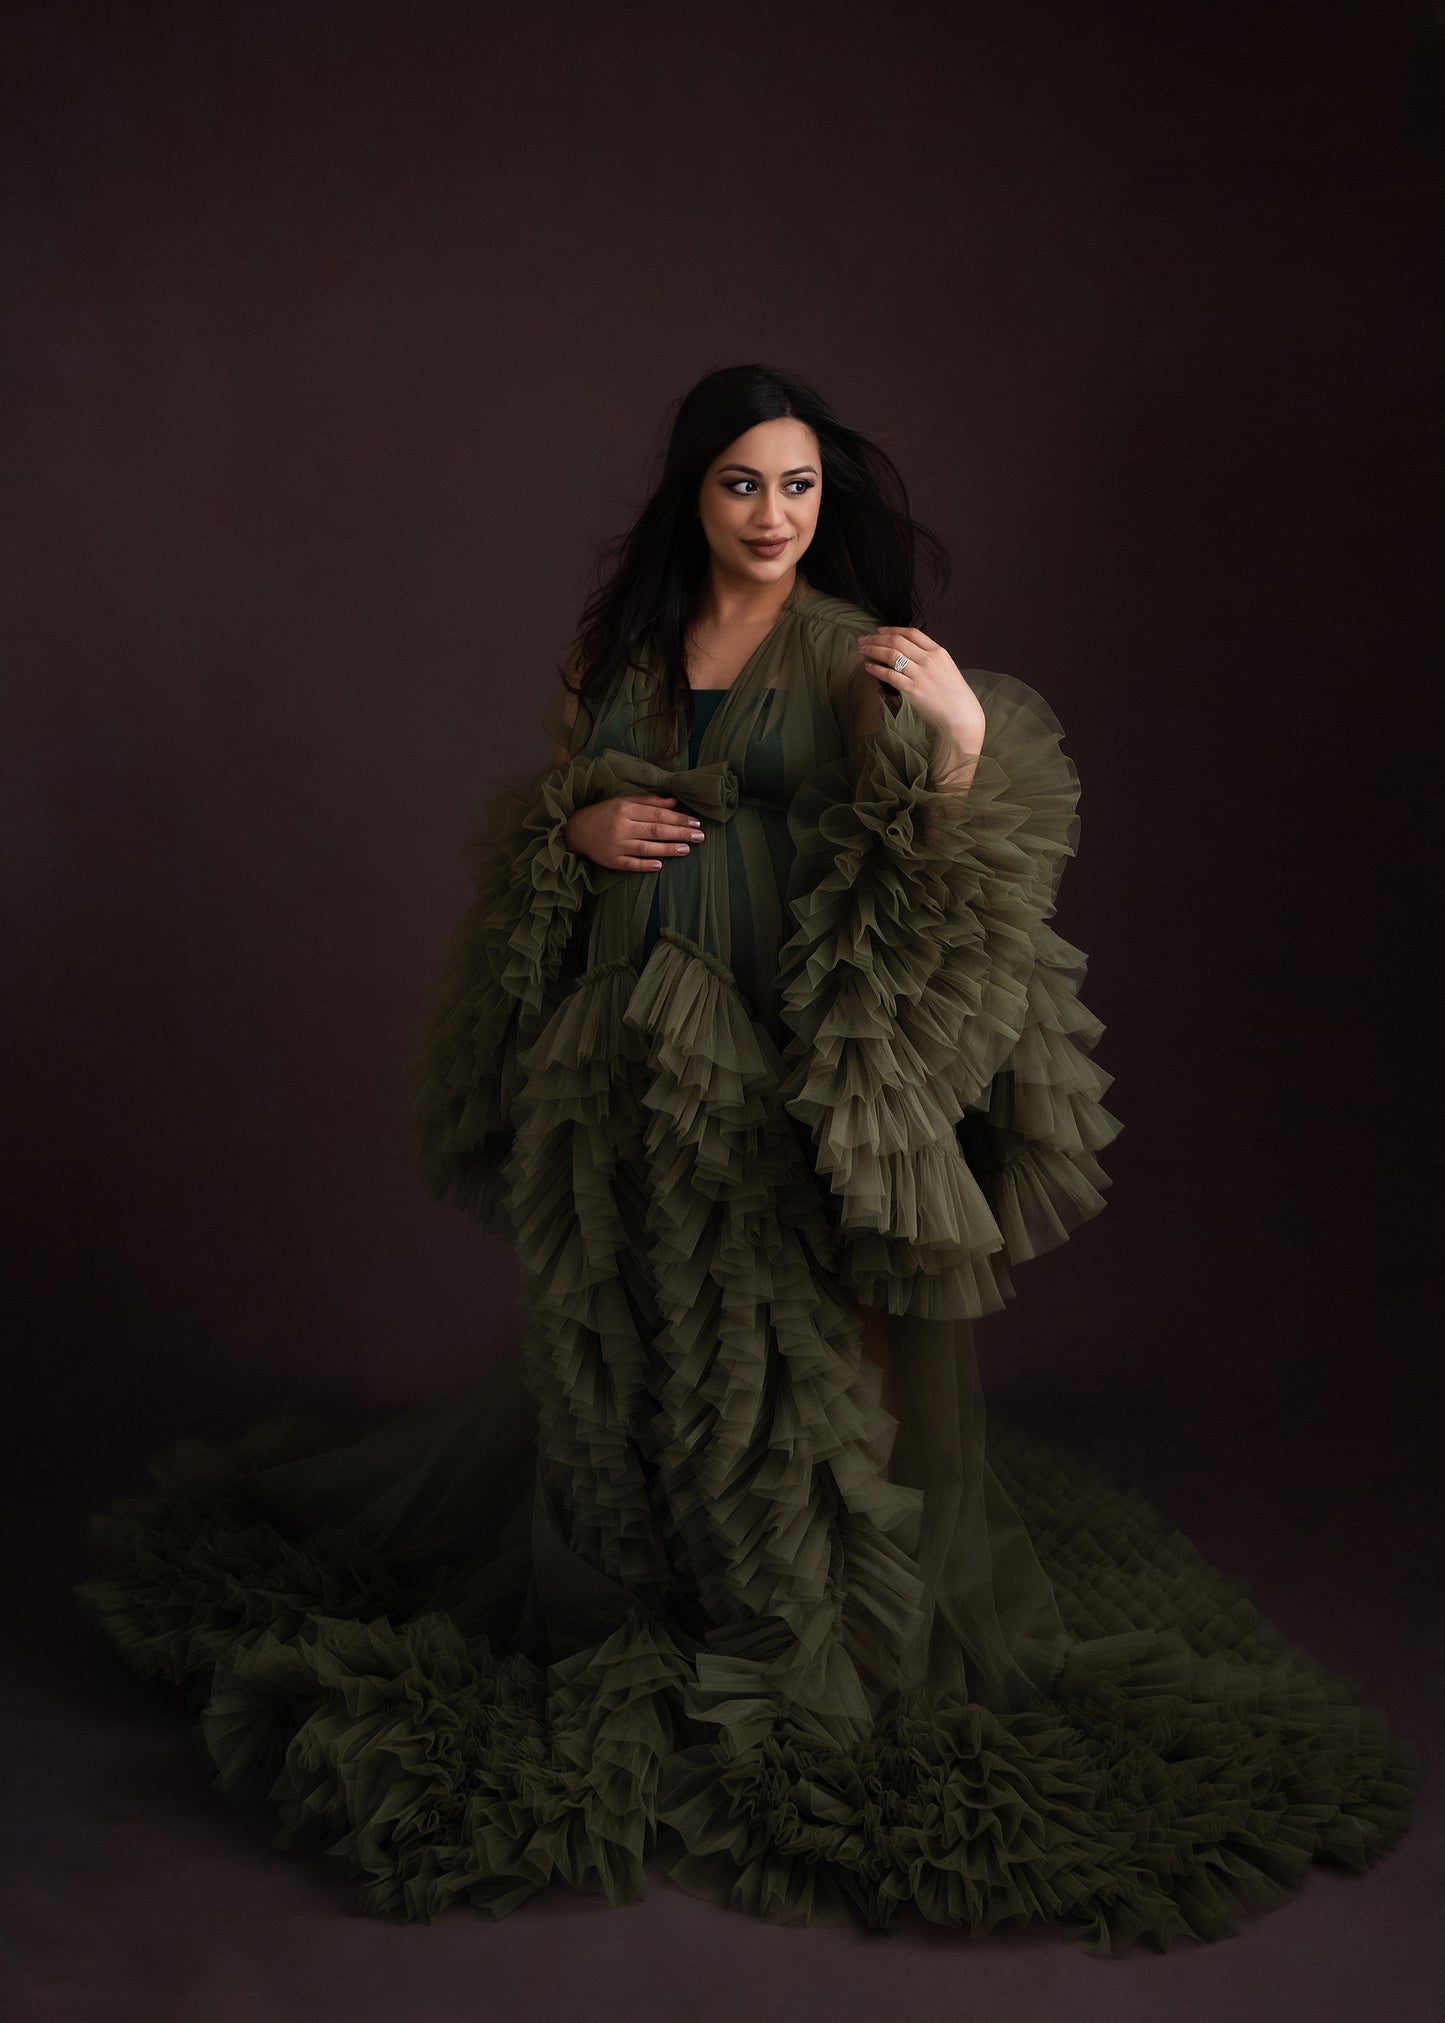 FOR HIRE / RENT tulle Olive Green Maternity Photoshoot Event Dress " The Queen " with matching daughter dress